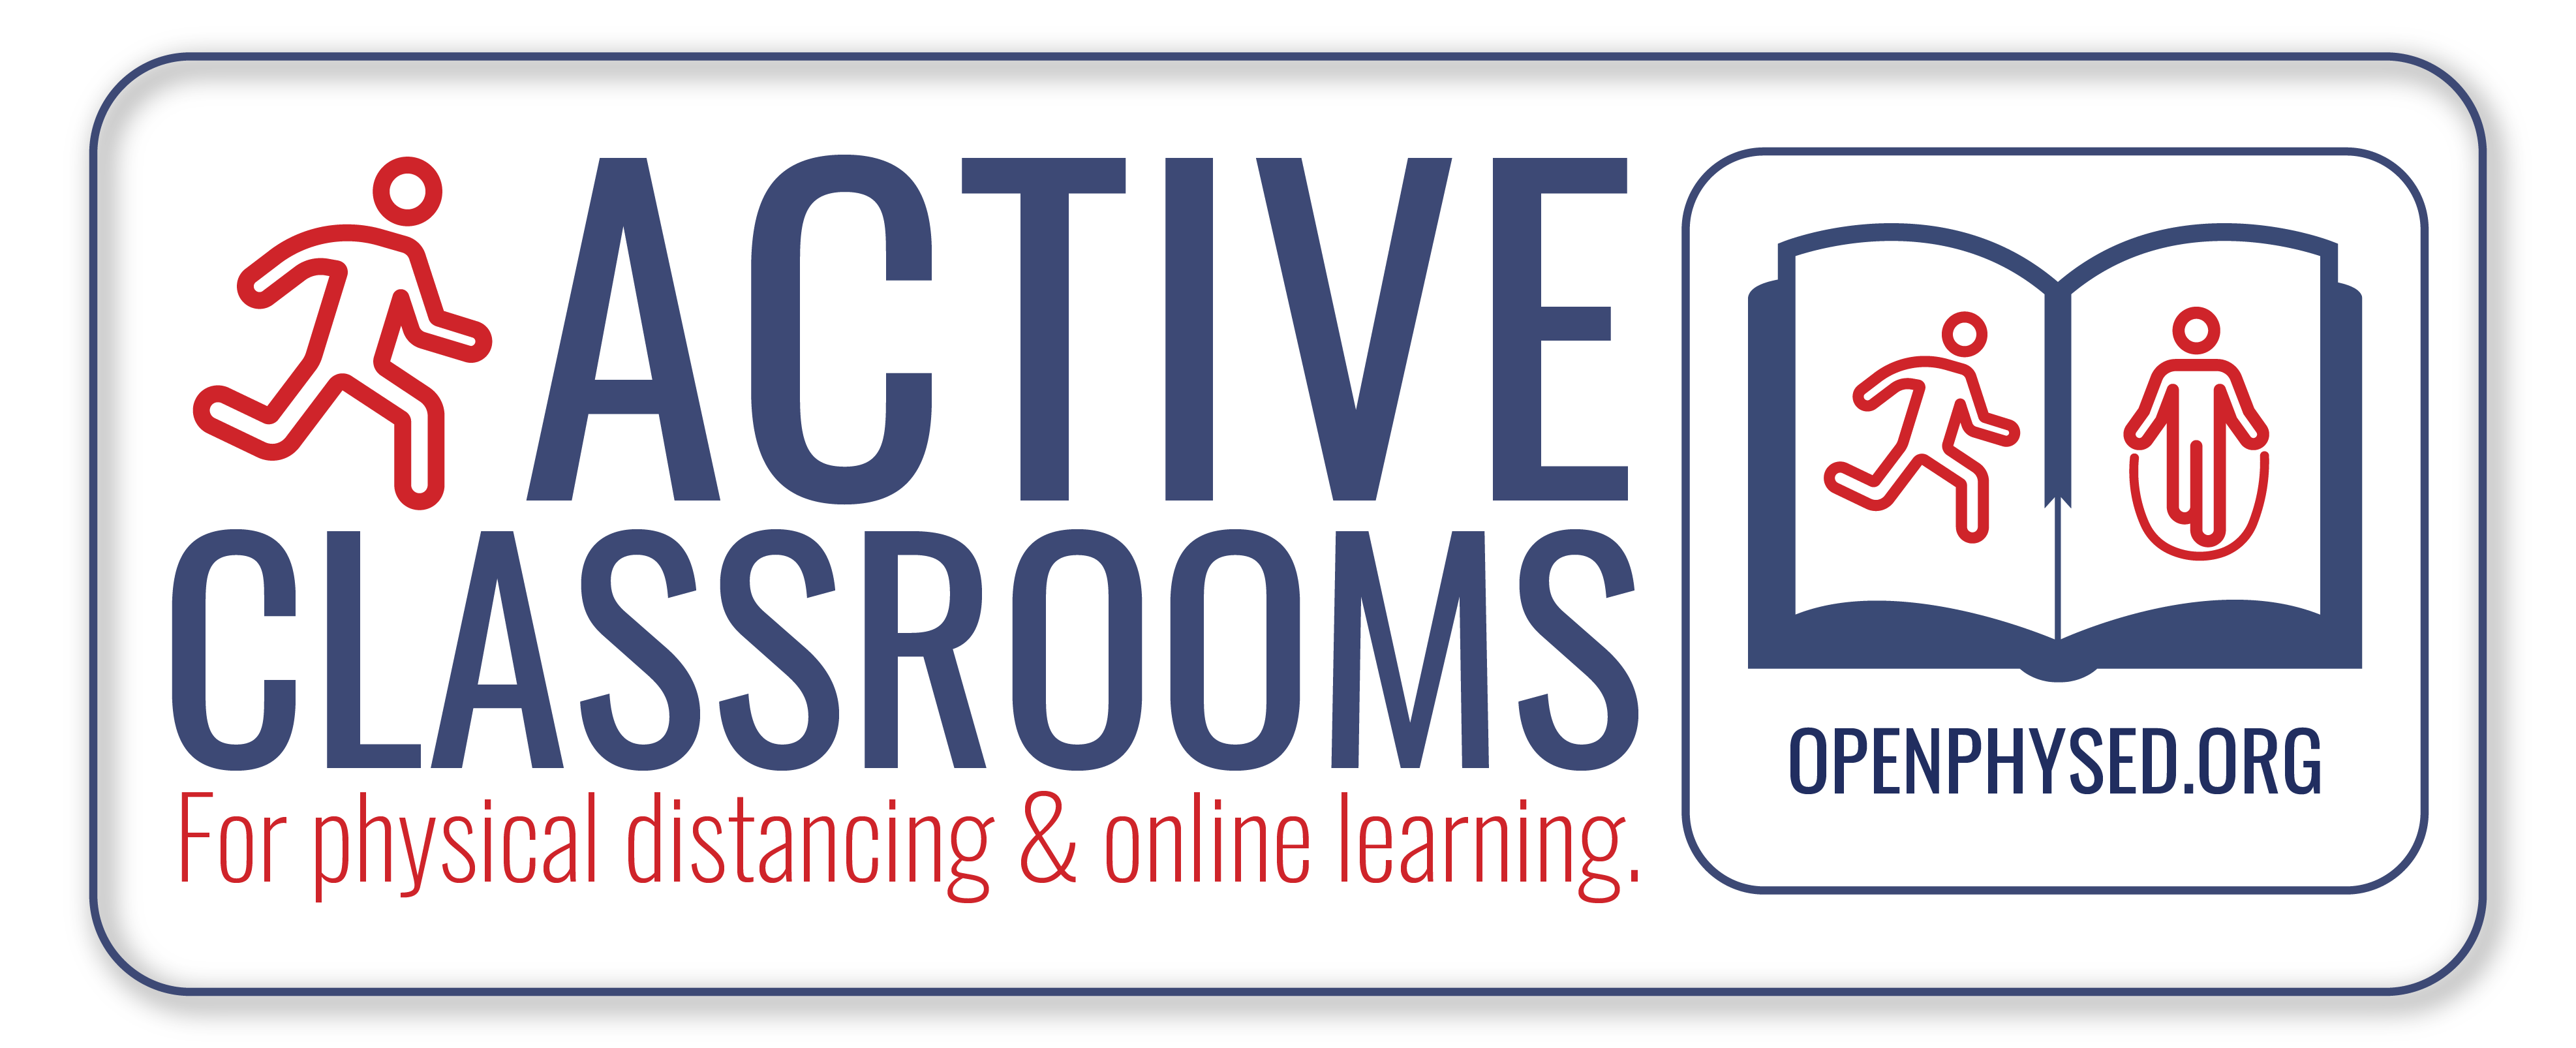 Active Classrooms 2020 Feature Image